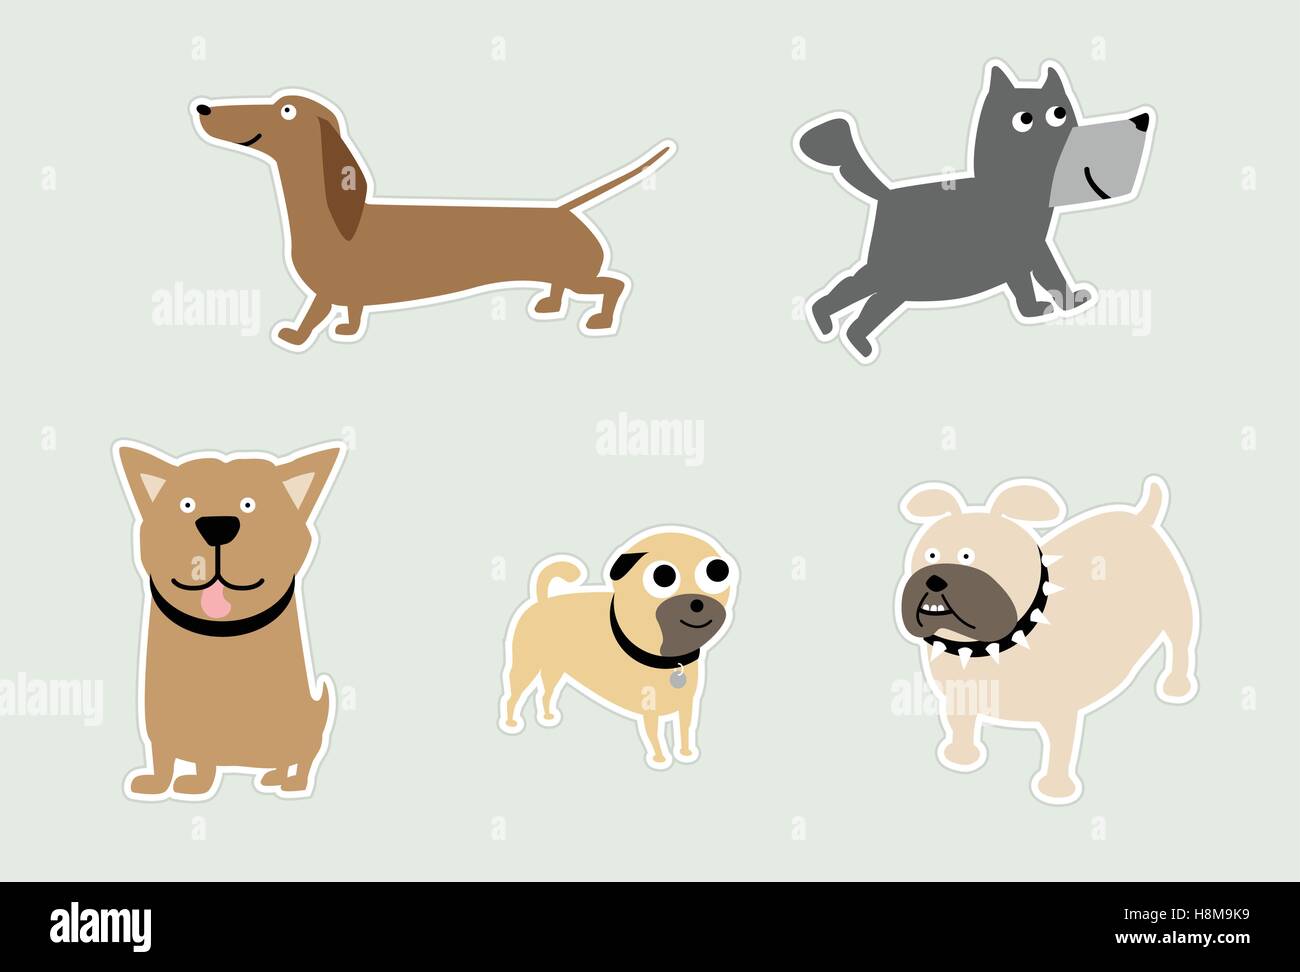 Five breeds of dogs as stickers; Dachshund, Pit-bull, Bulldog, Pug, and a Terrier Stock Vector